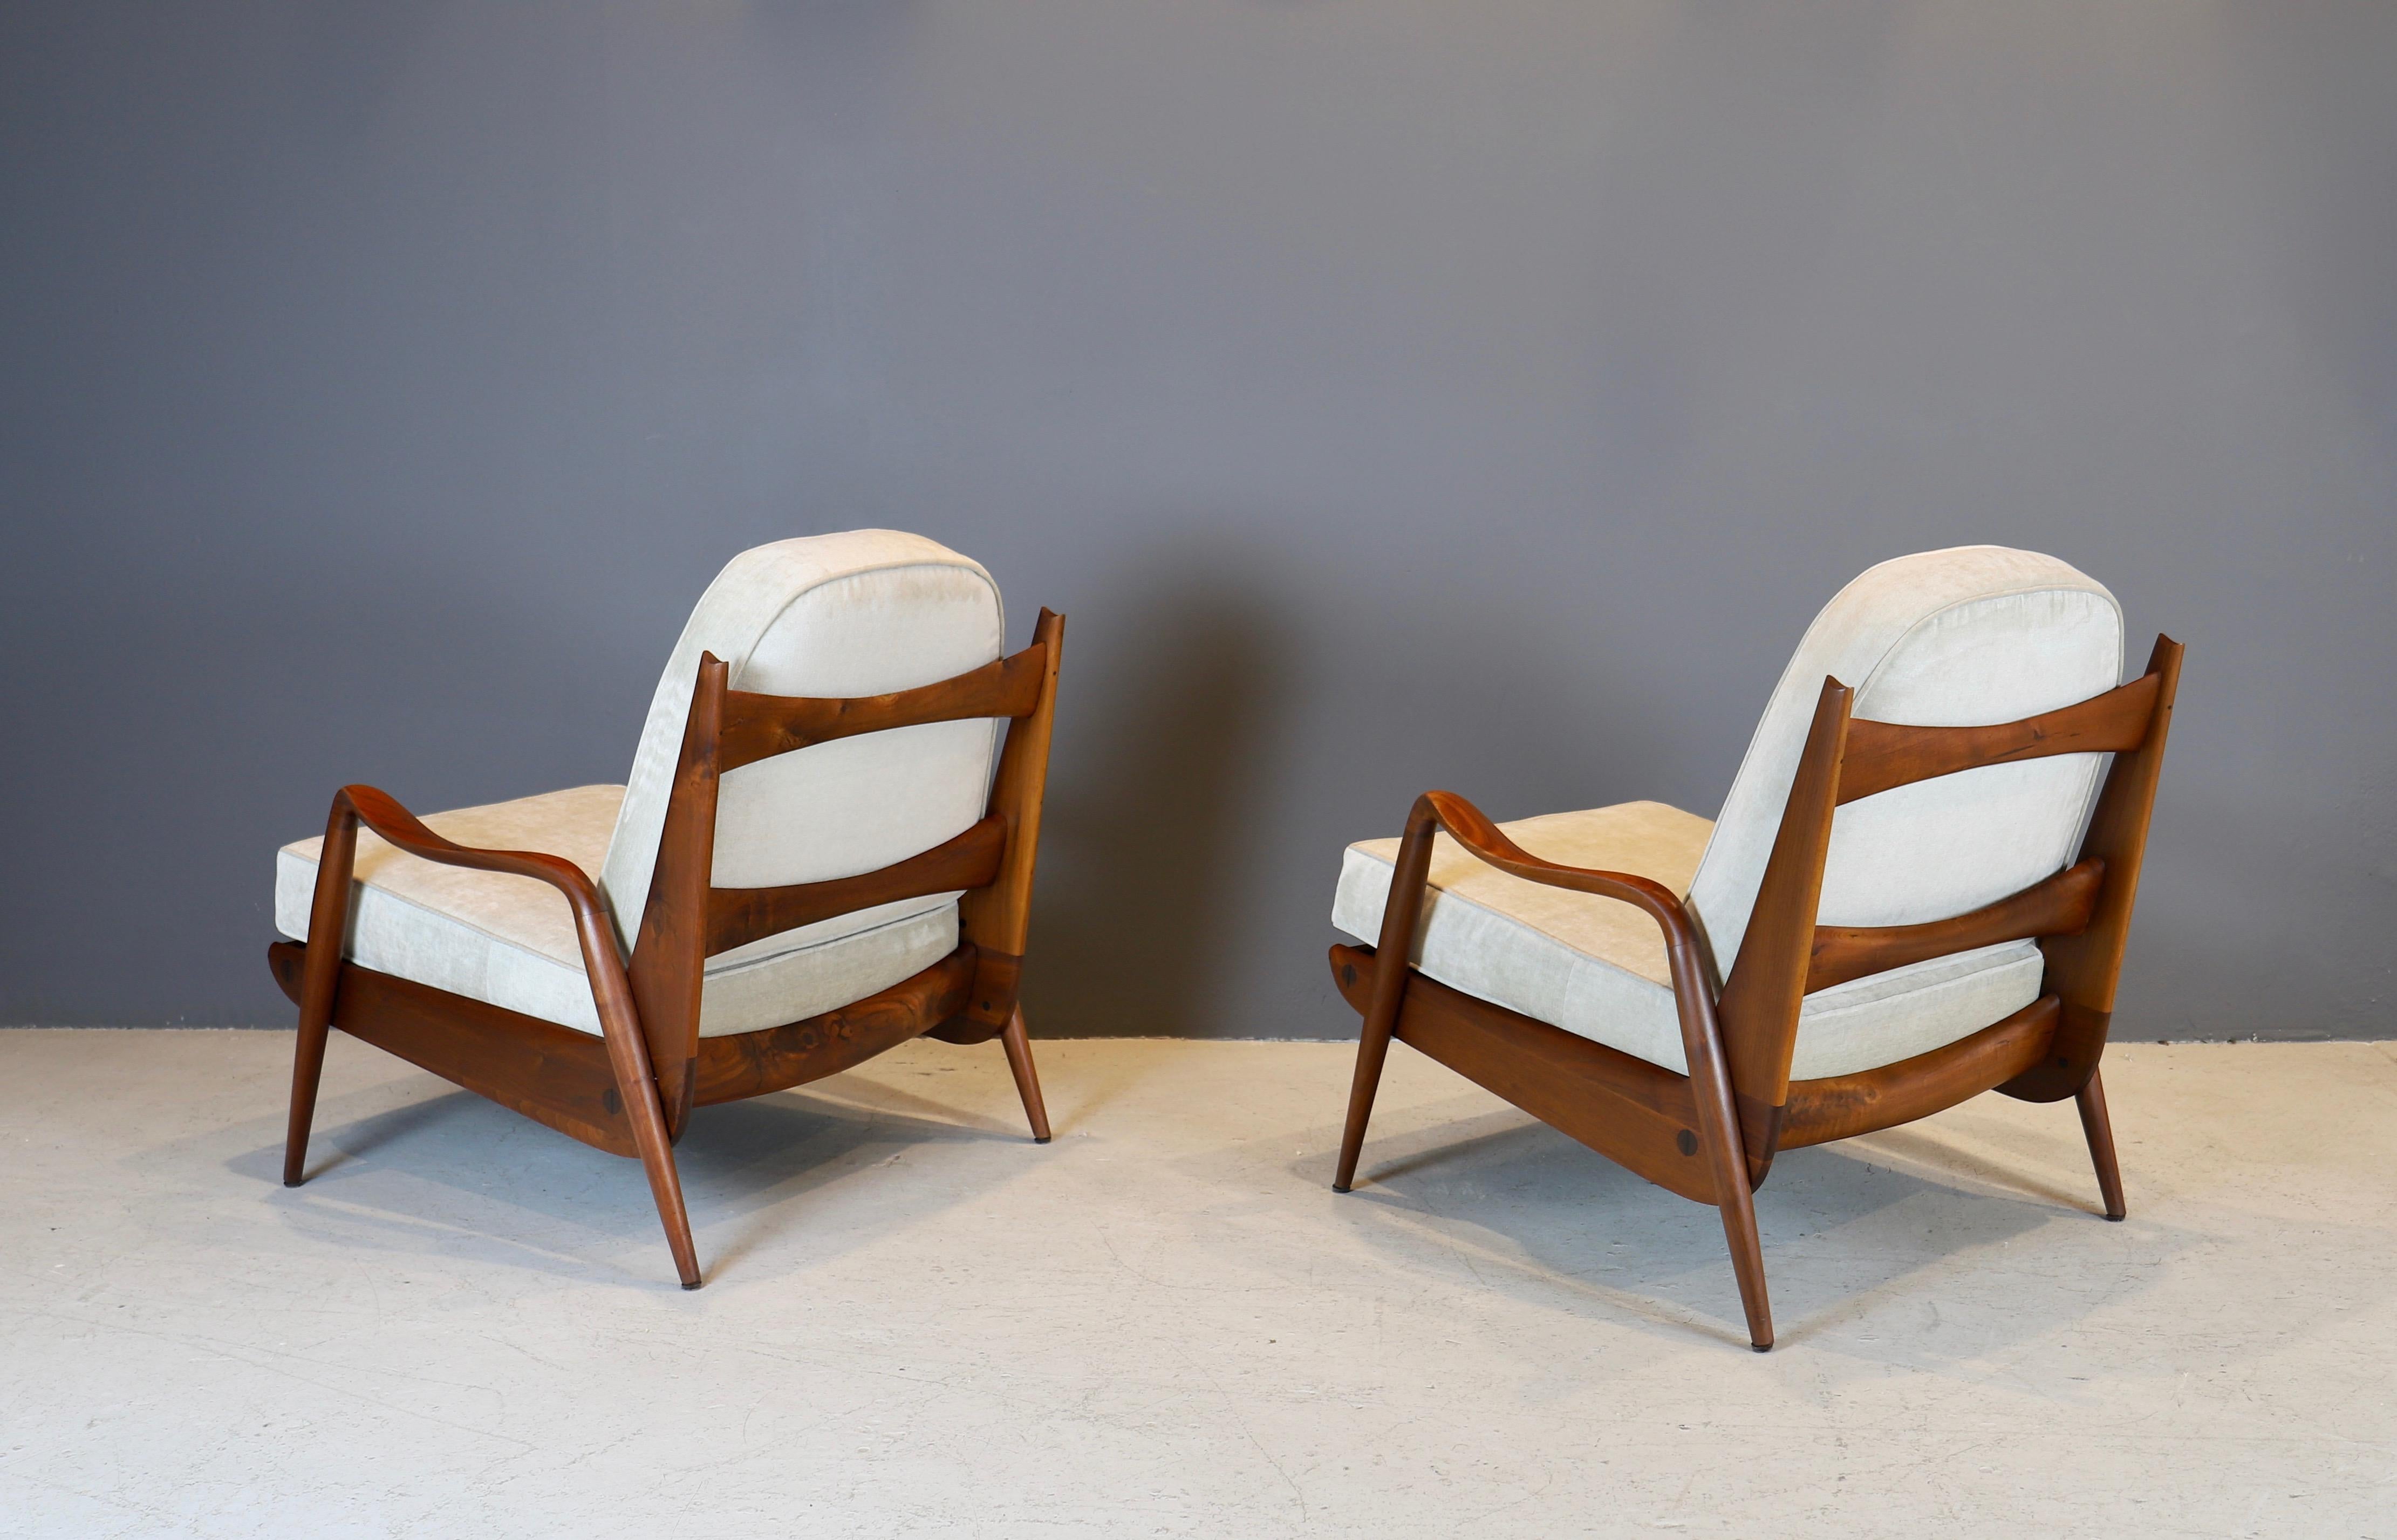 Rare pair of hand-sculpted walnut lounge chairs by New Hope studio artist Phillip Lloyd Powell, circa 1970s.
Walnut frames have been cleaned and conditioned with oil, cushions are new in Holly Hunt fabric.
  